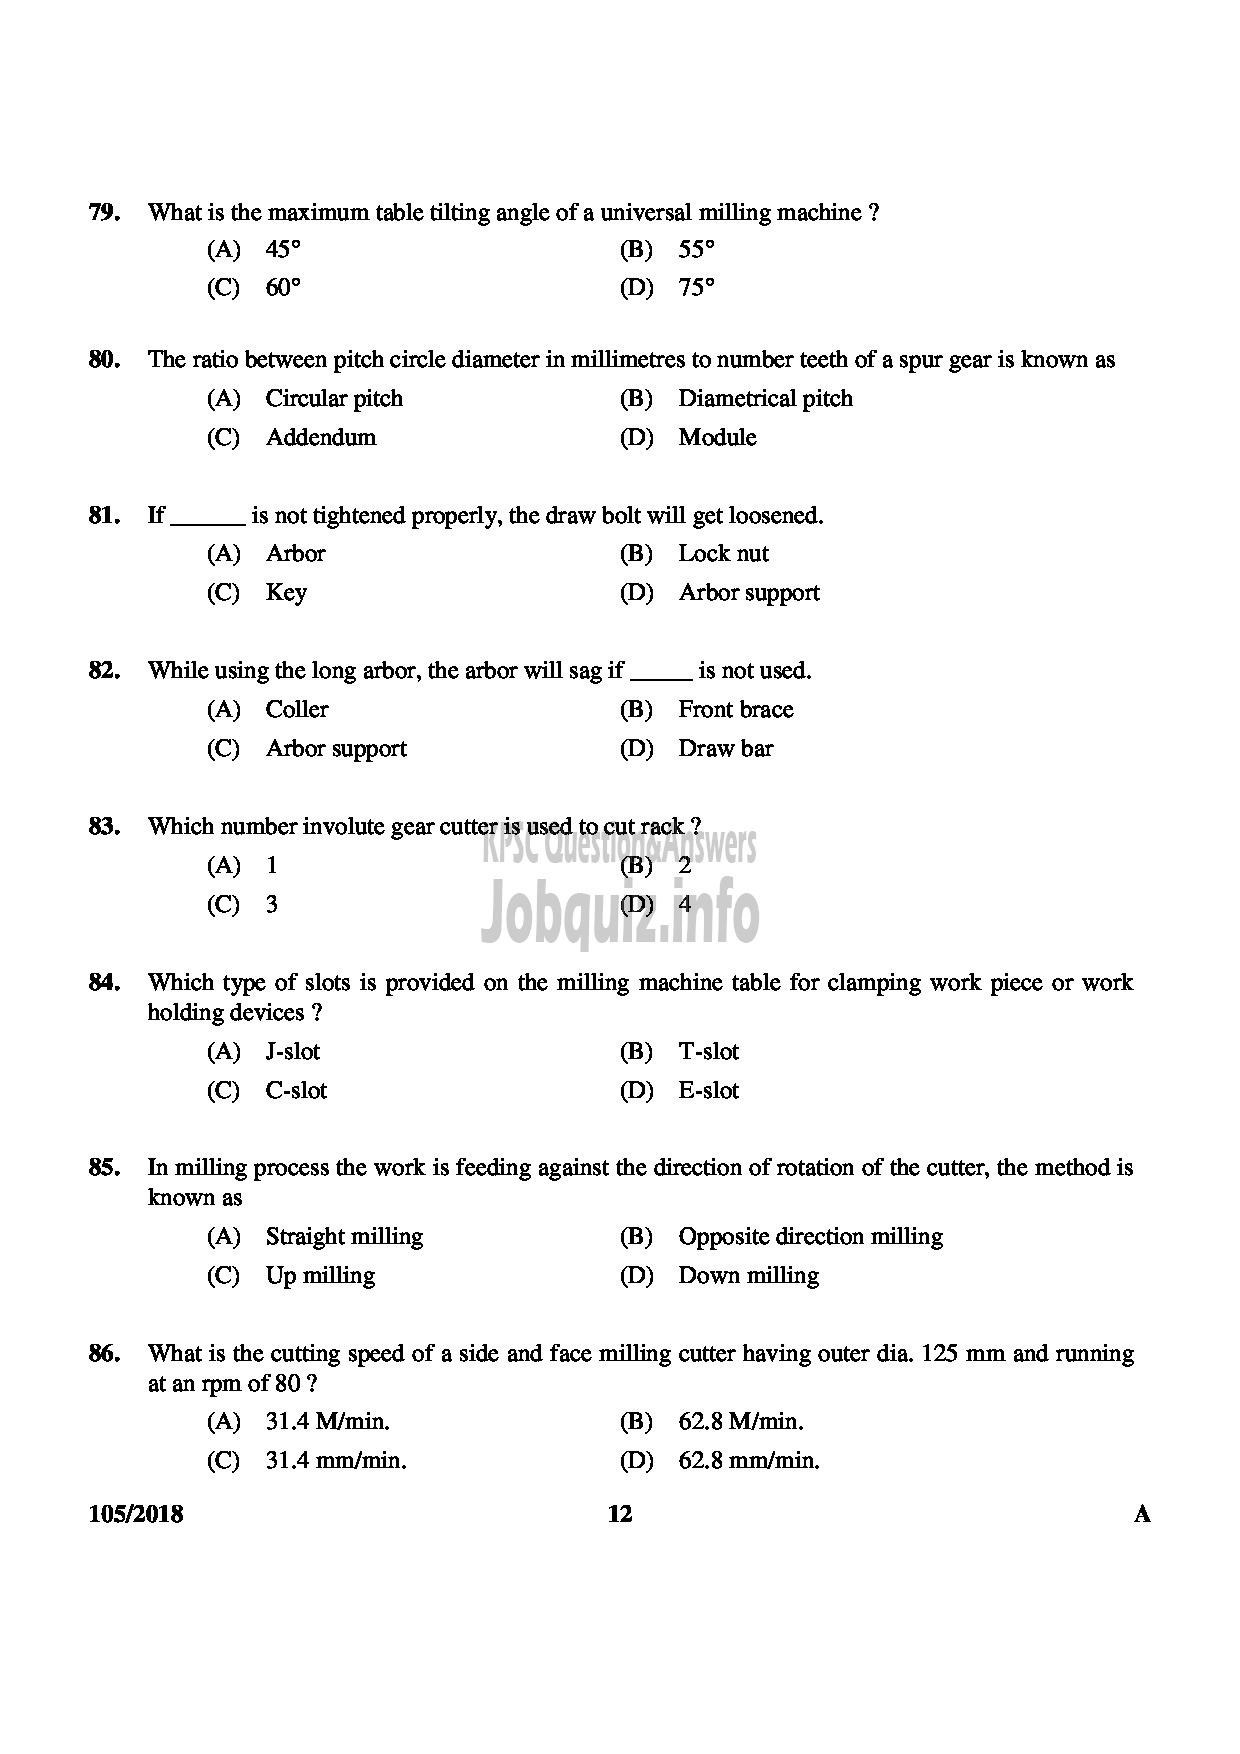 Kerala PSC Question Paper - JUNIOR INSTRUCTOR MACHINIST INDUSTRIAL TRAINING English -12